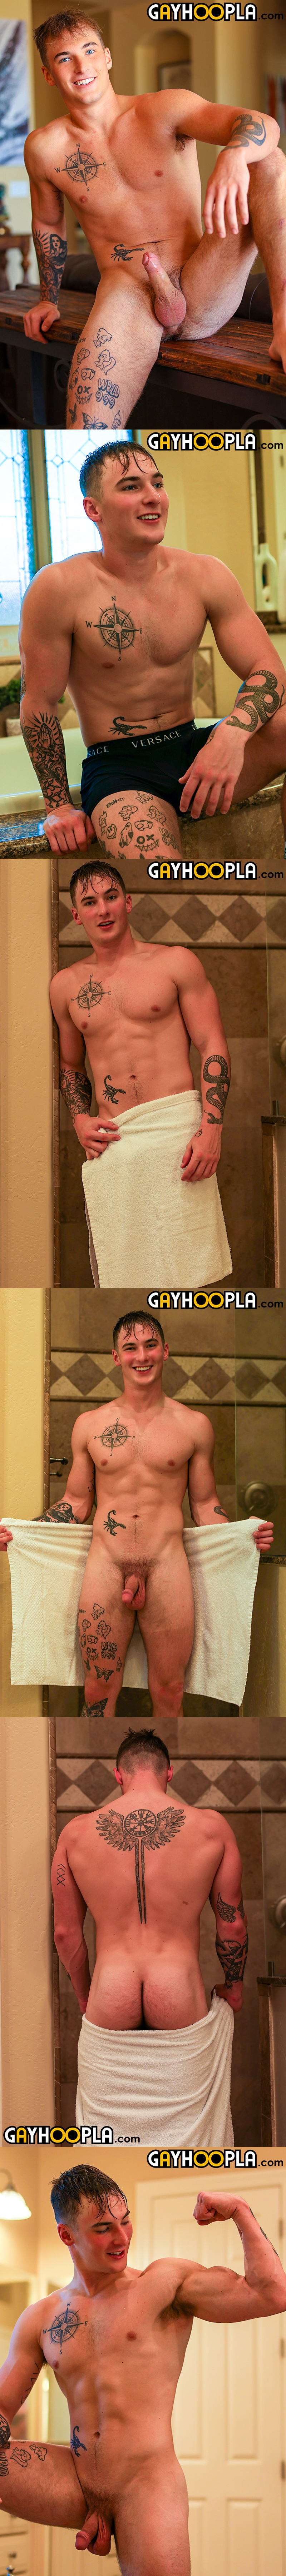 TYLER FRENCH [Frat Hottie Strokes His Morning Wood!] at GayHoopla